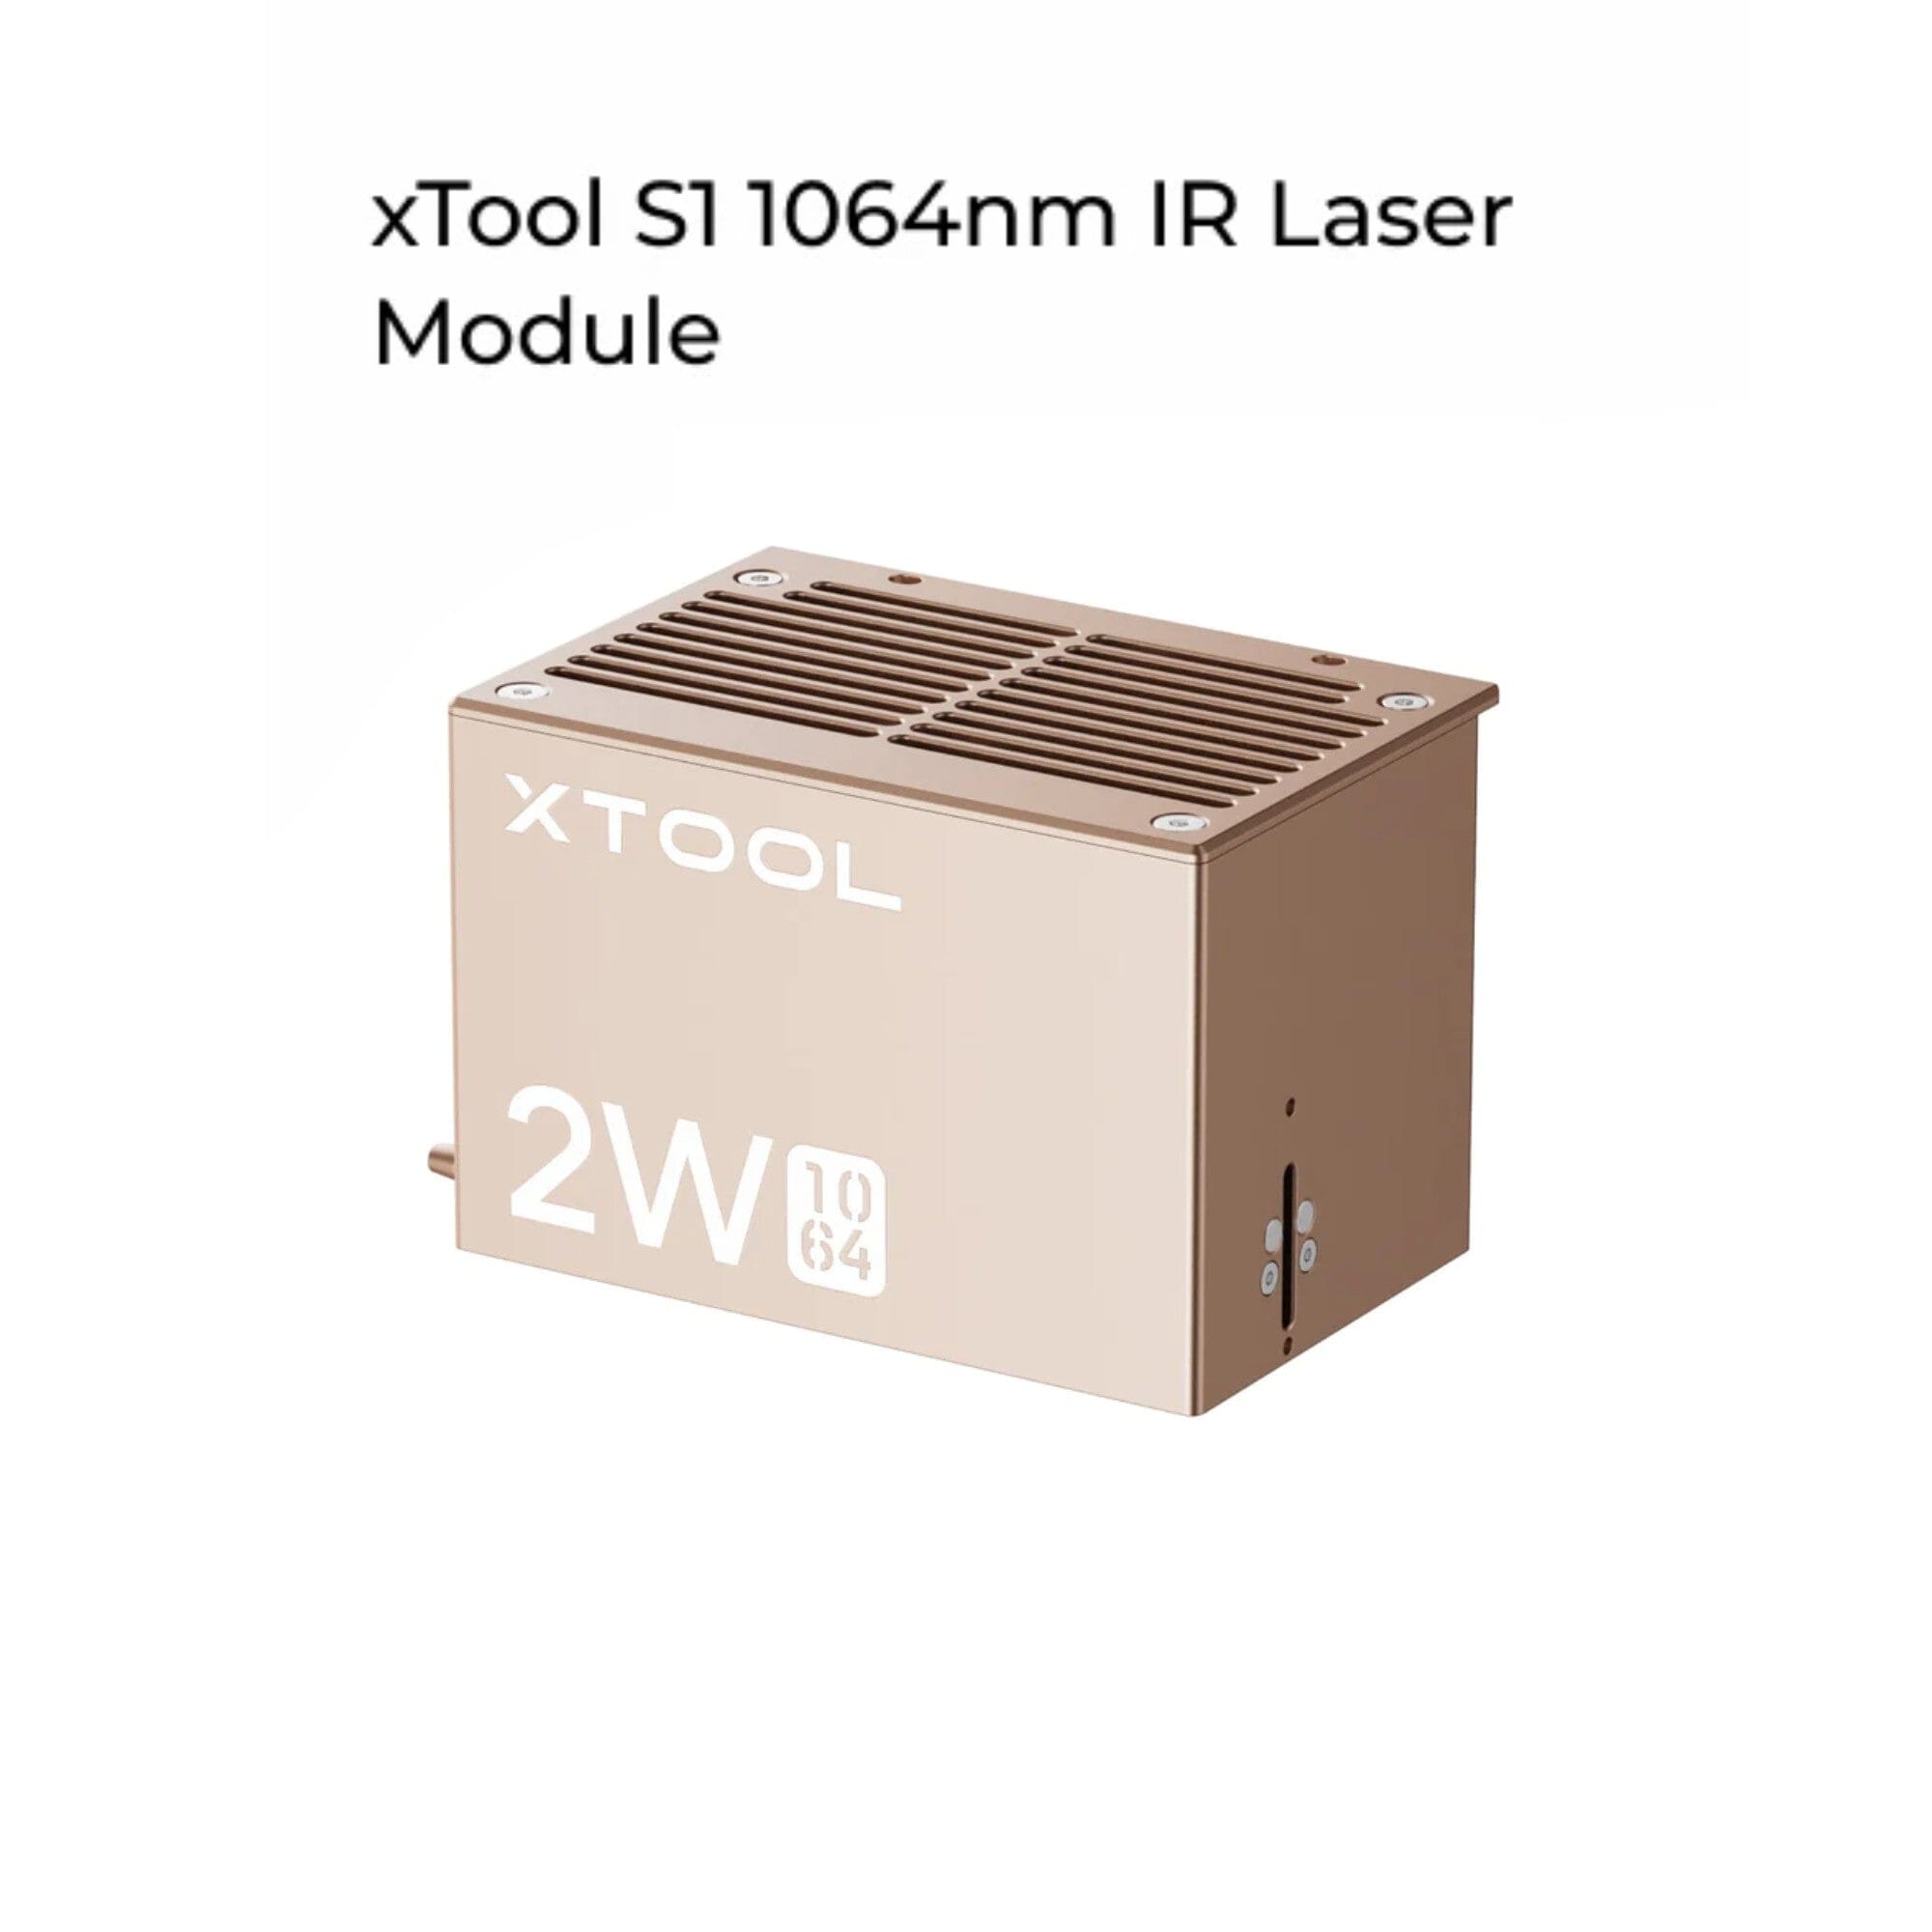 xTool 1064nm Infrared Laser Engraving Module for S1 Laser Cutter